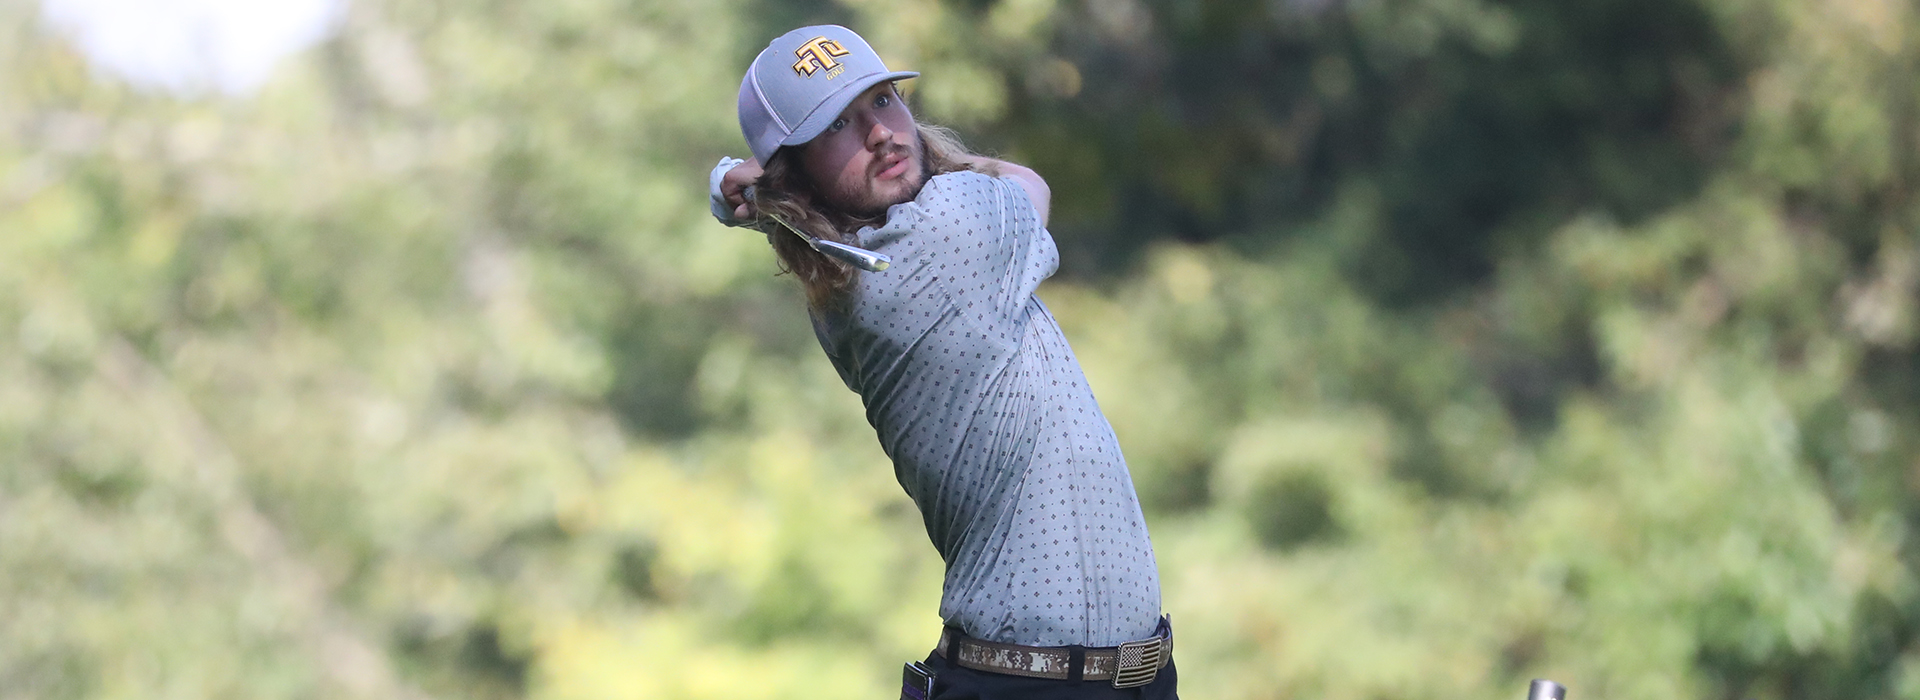 Golden Eagles in striking distance at Grover Page Classic, finish day one in second